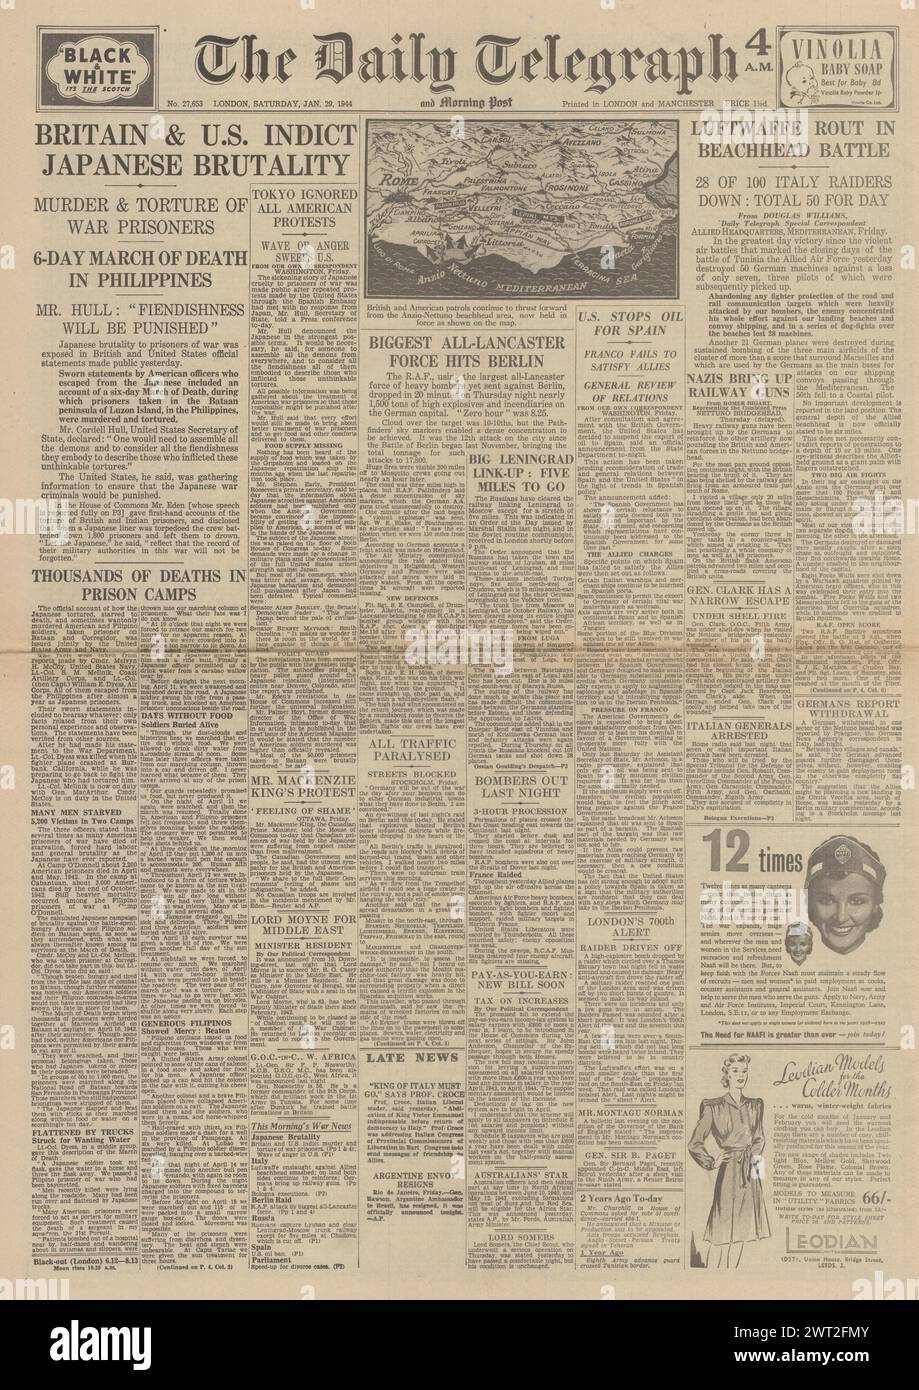 1944 The Daily Telegraph front page reporting Battle for Italy, Red Army capture Leningrad Moscow rail line and Japanese atrocities Stock Photo